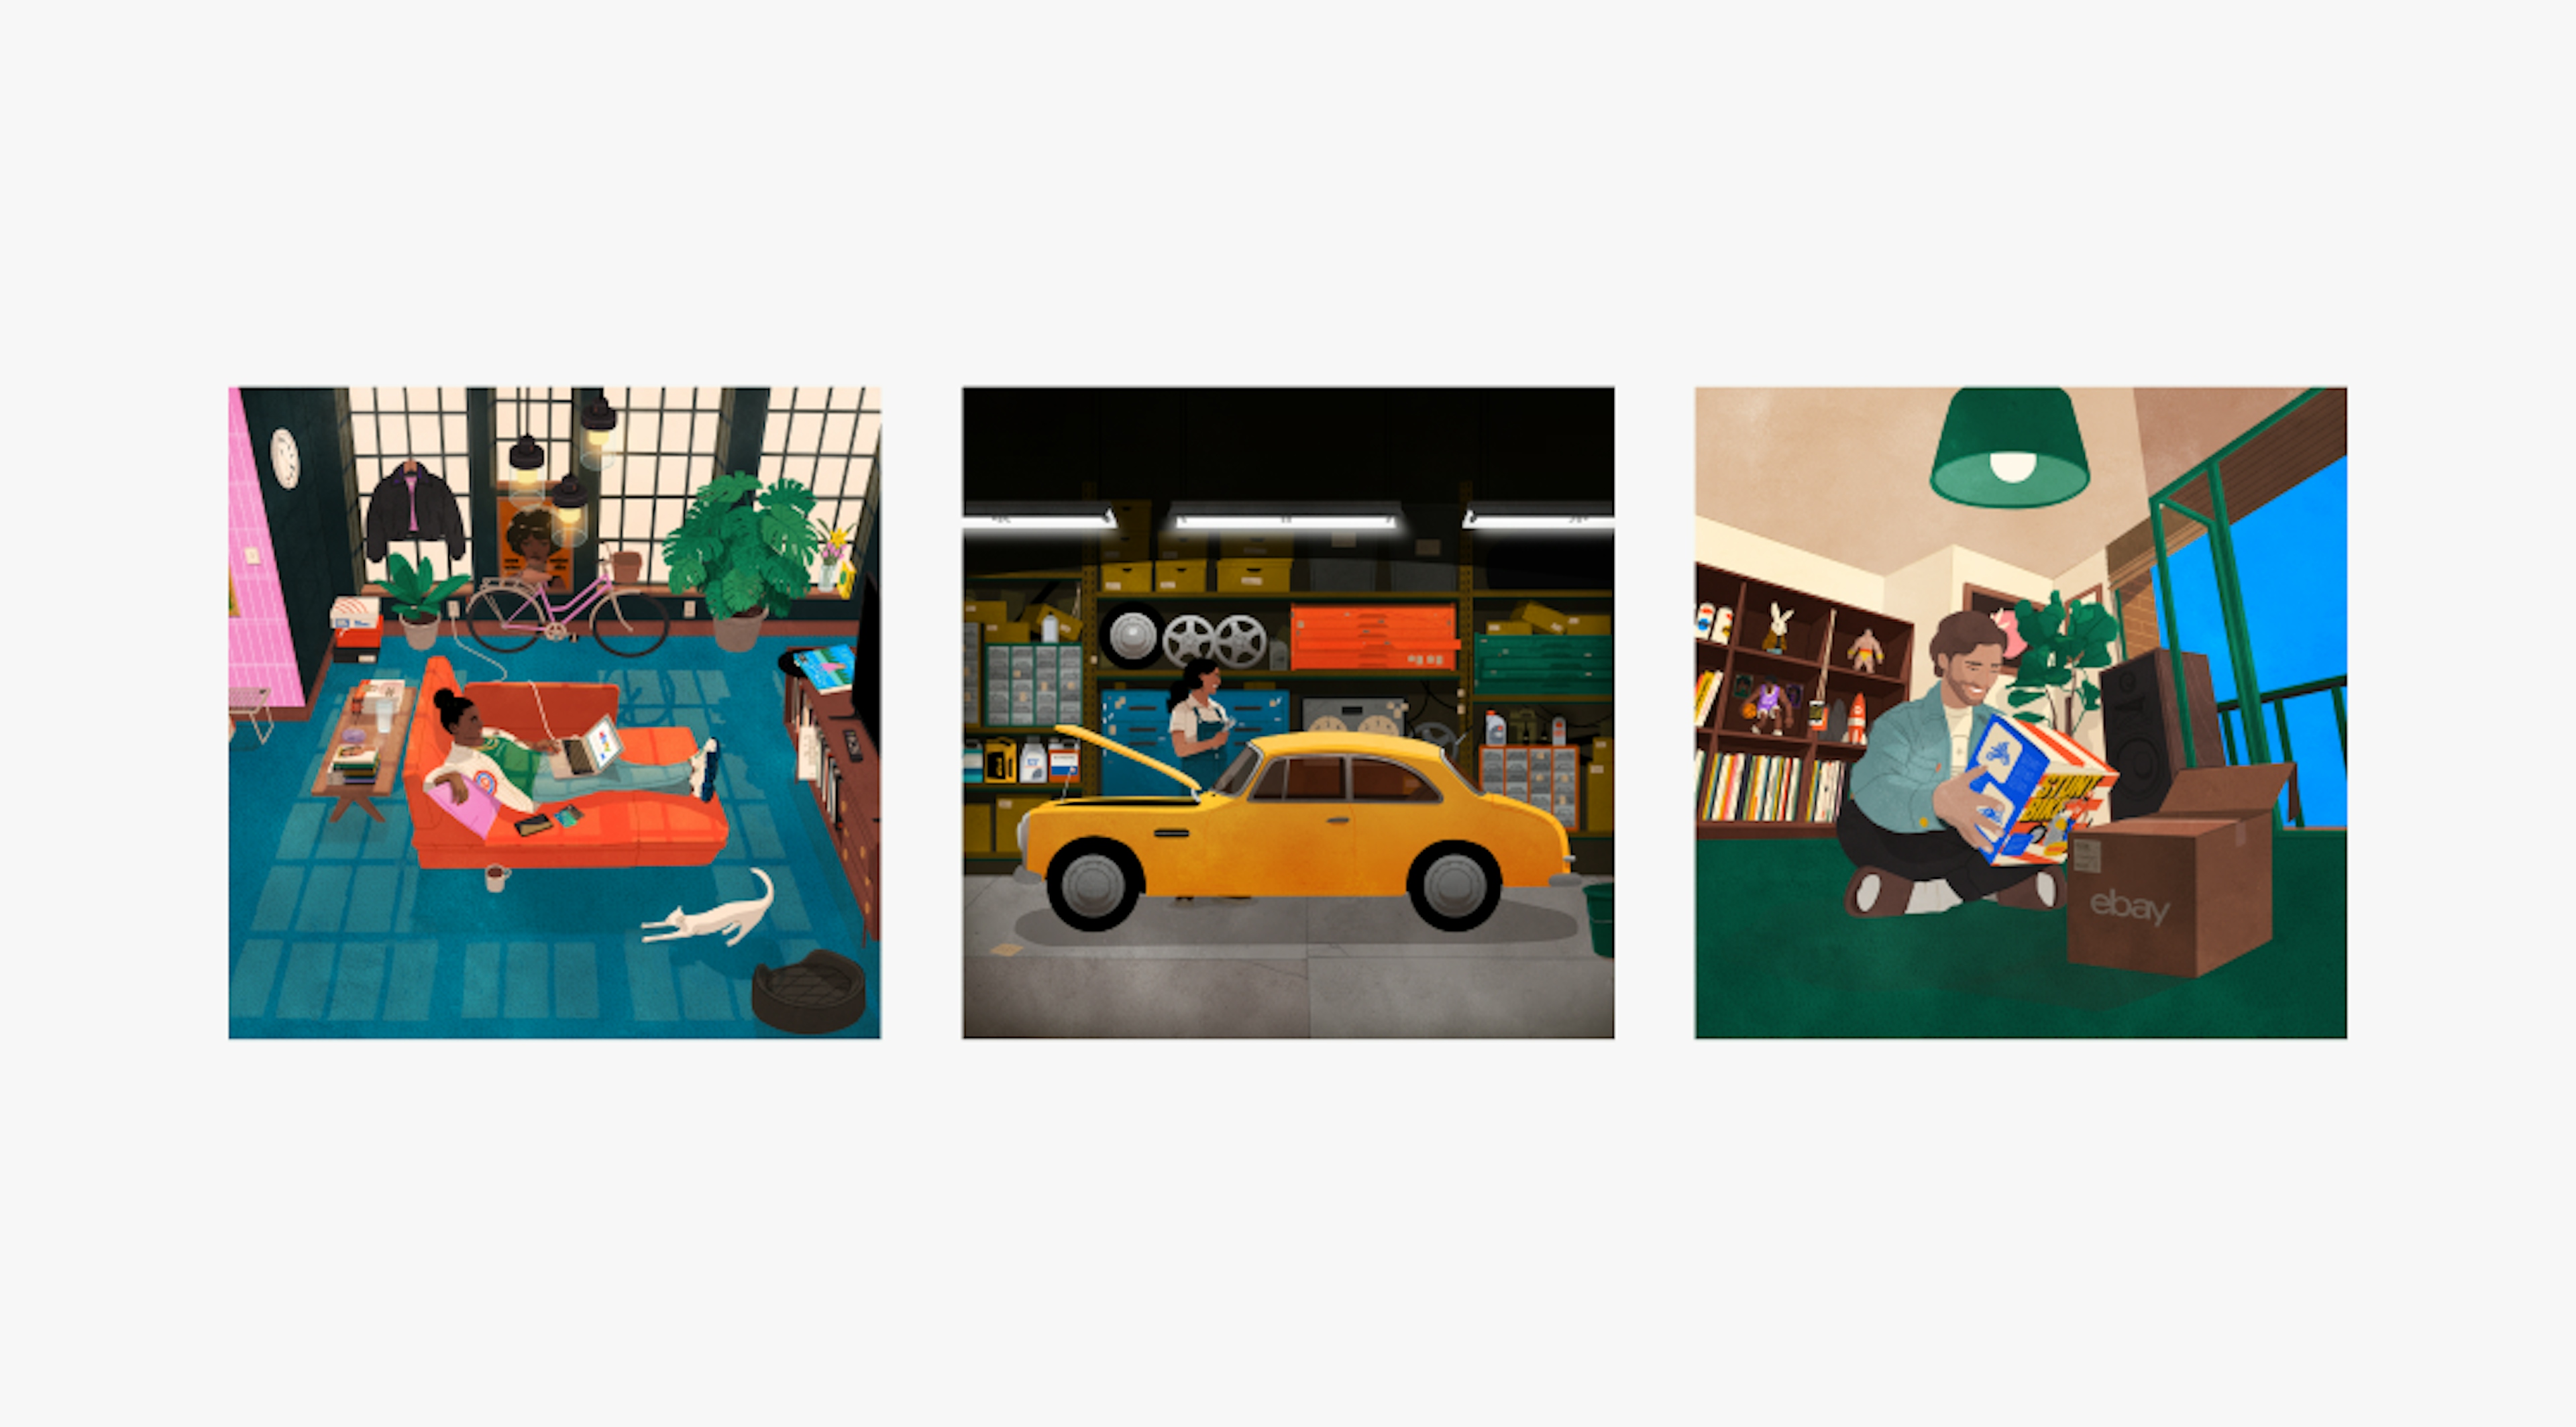 3 distinct illustrations highlighting scenes:
A person lies on an orange sofa with a laptop displaying eBay. The room includes a bicycle, plants, a white cat, and various items like books, a coffee table, and a poster on the wall.
A person is working on a yellow car in a garage filled with shelves of auto parts and tools.
A person sitting on the floor is opening an eBay box and holding a "Stunt Bike" toy set. The room has bookshelves, toys, plants, and large windows.